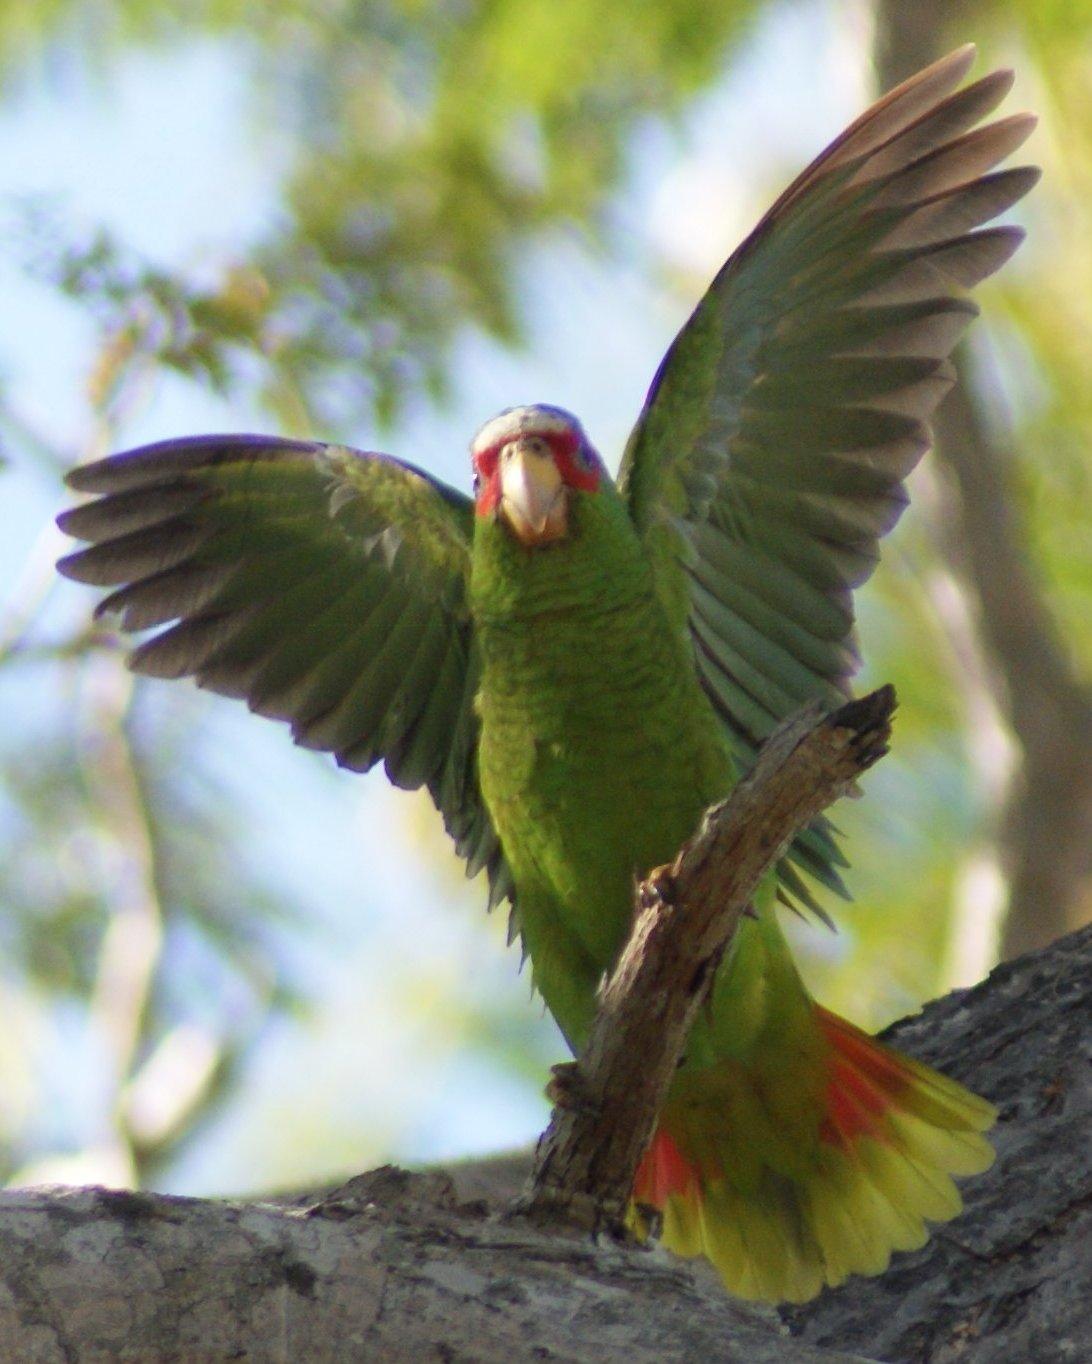 White-fronted Parrot Photo by Robin Oxley